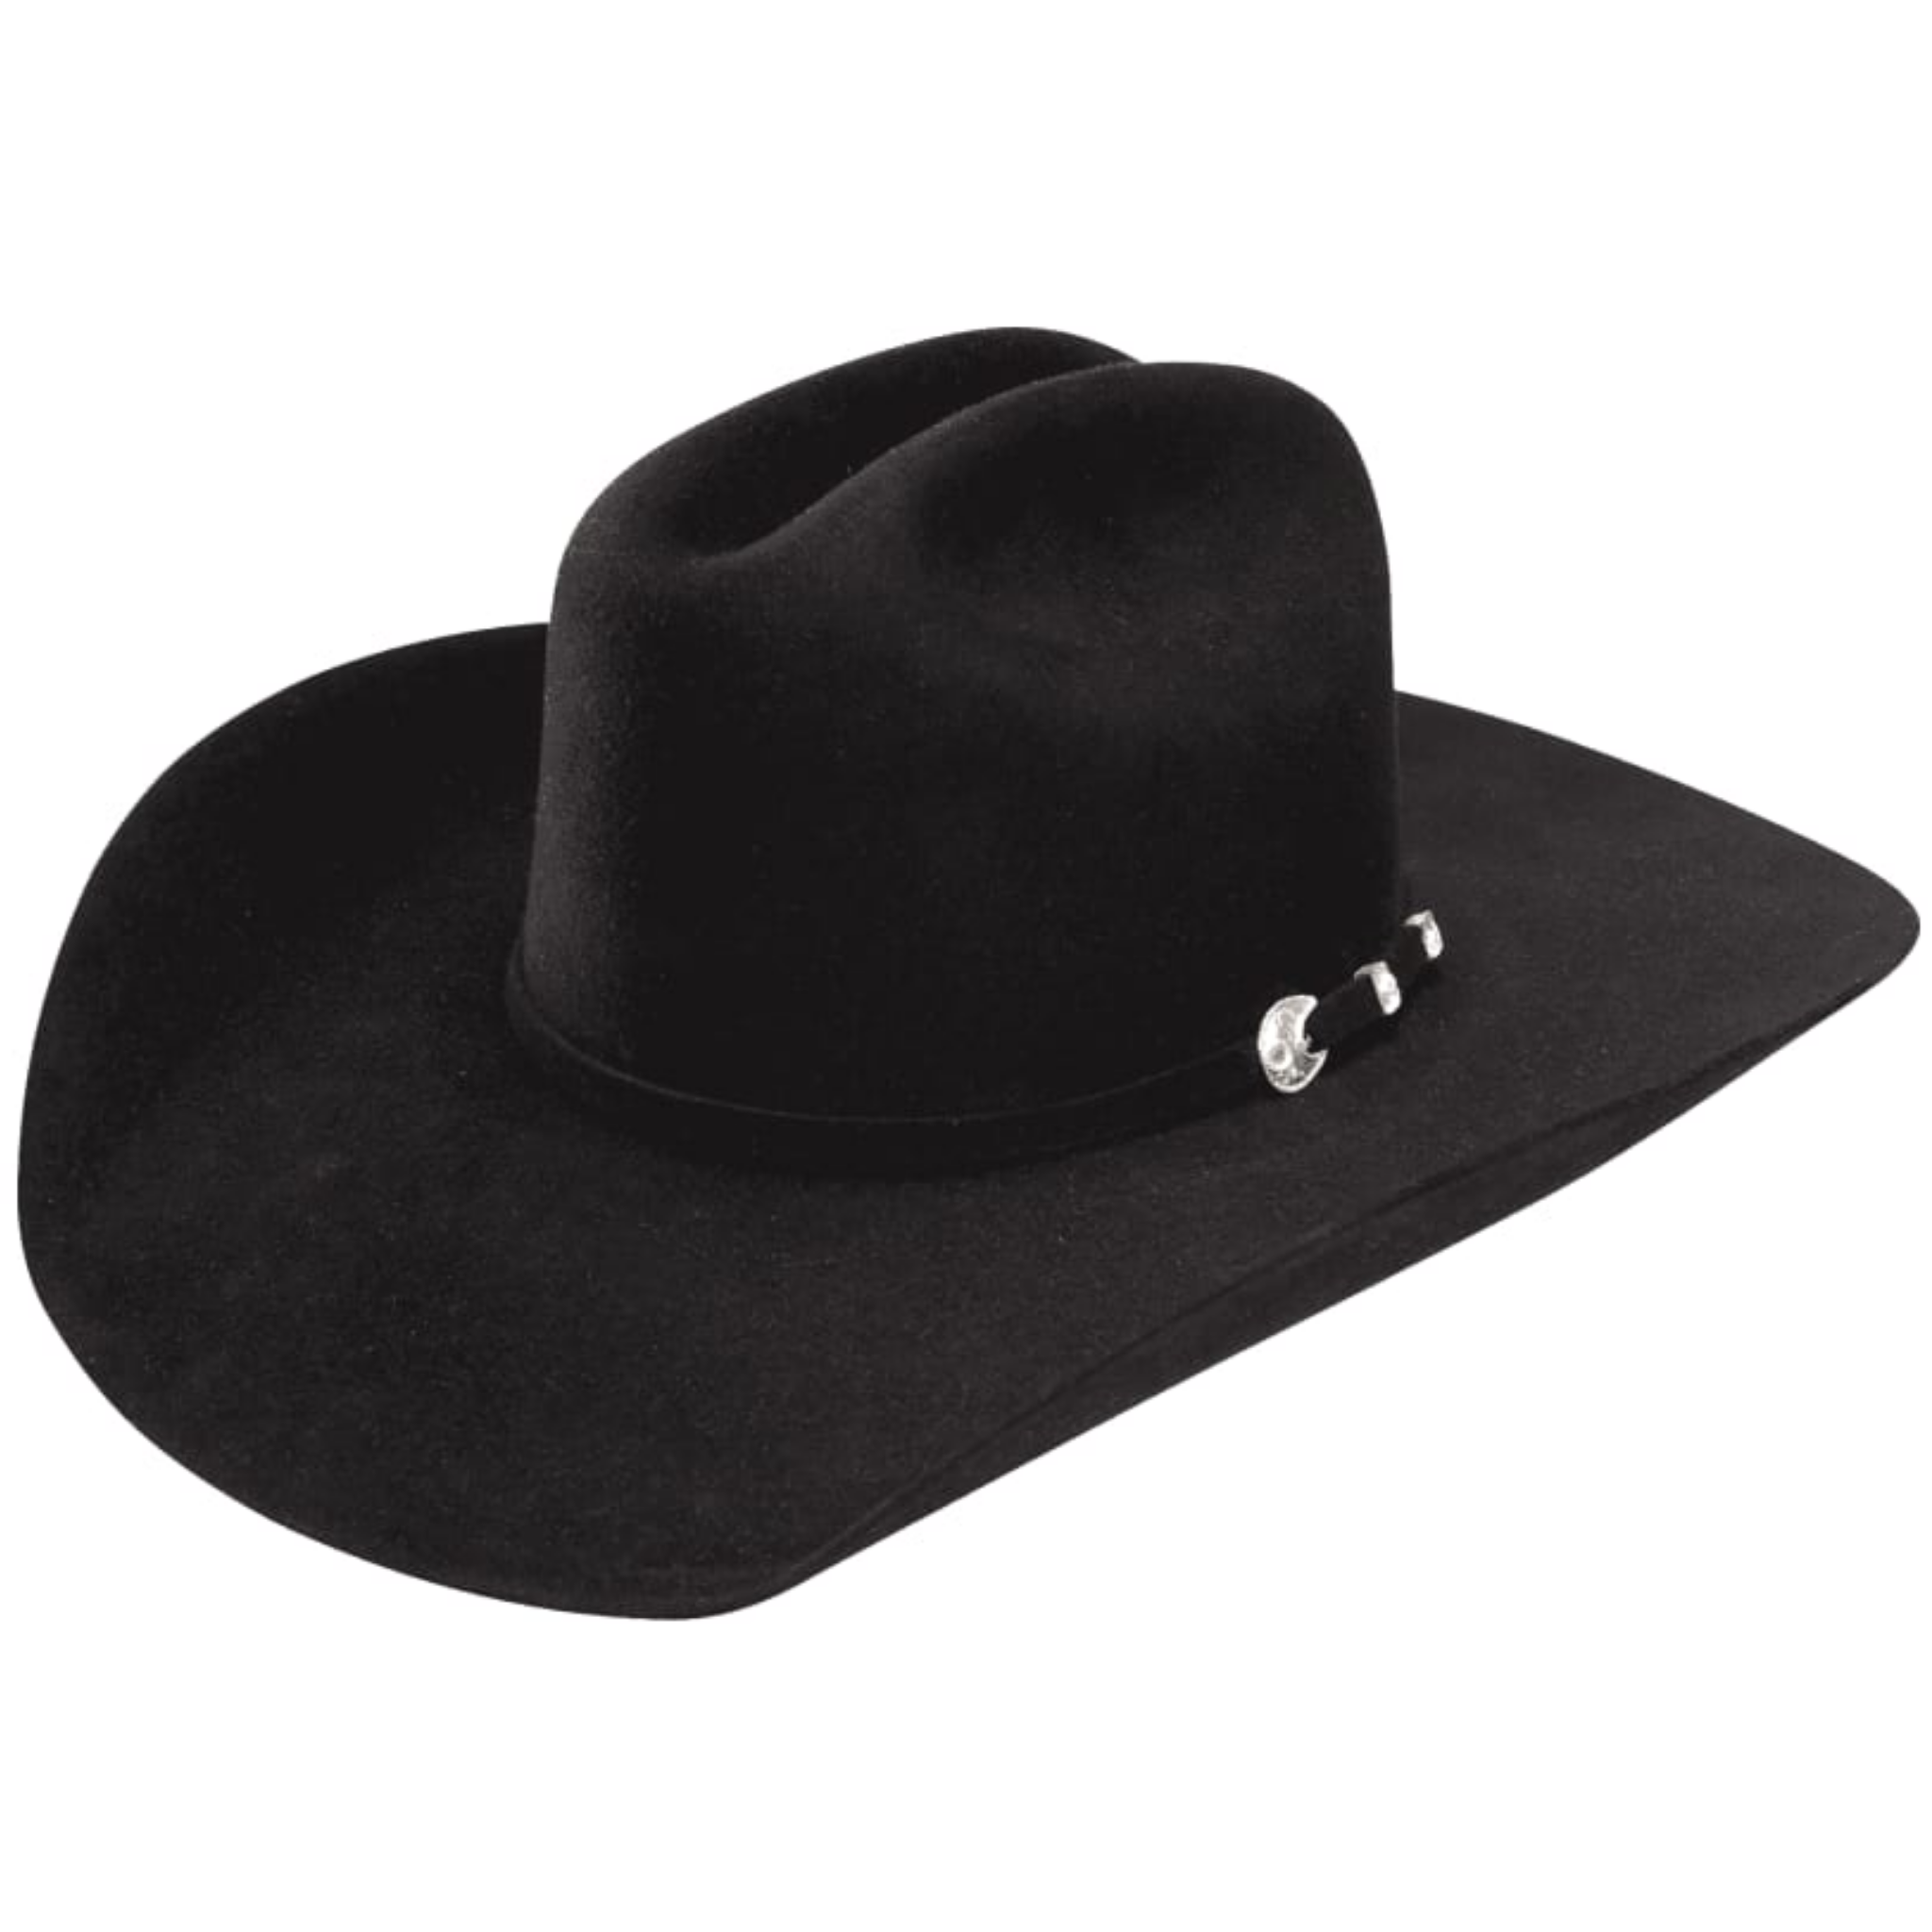 Crystal Springs resident makes western-style felt hats for customers